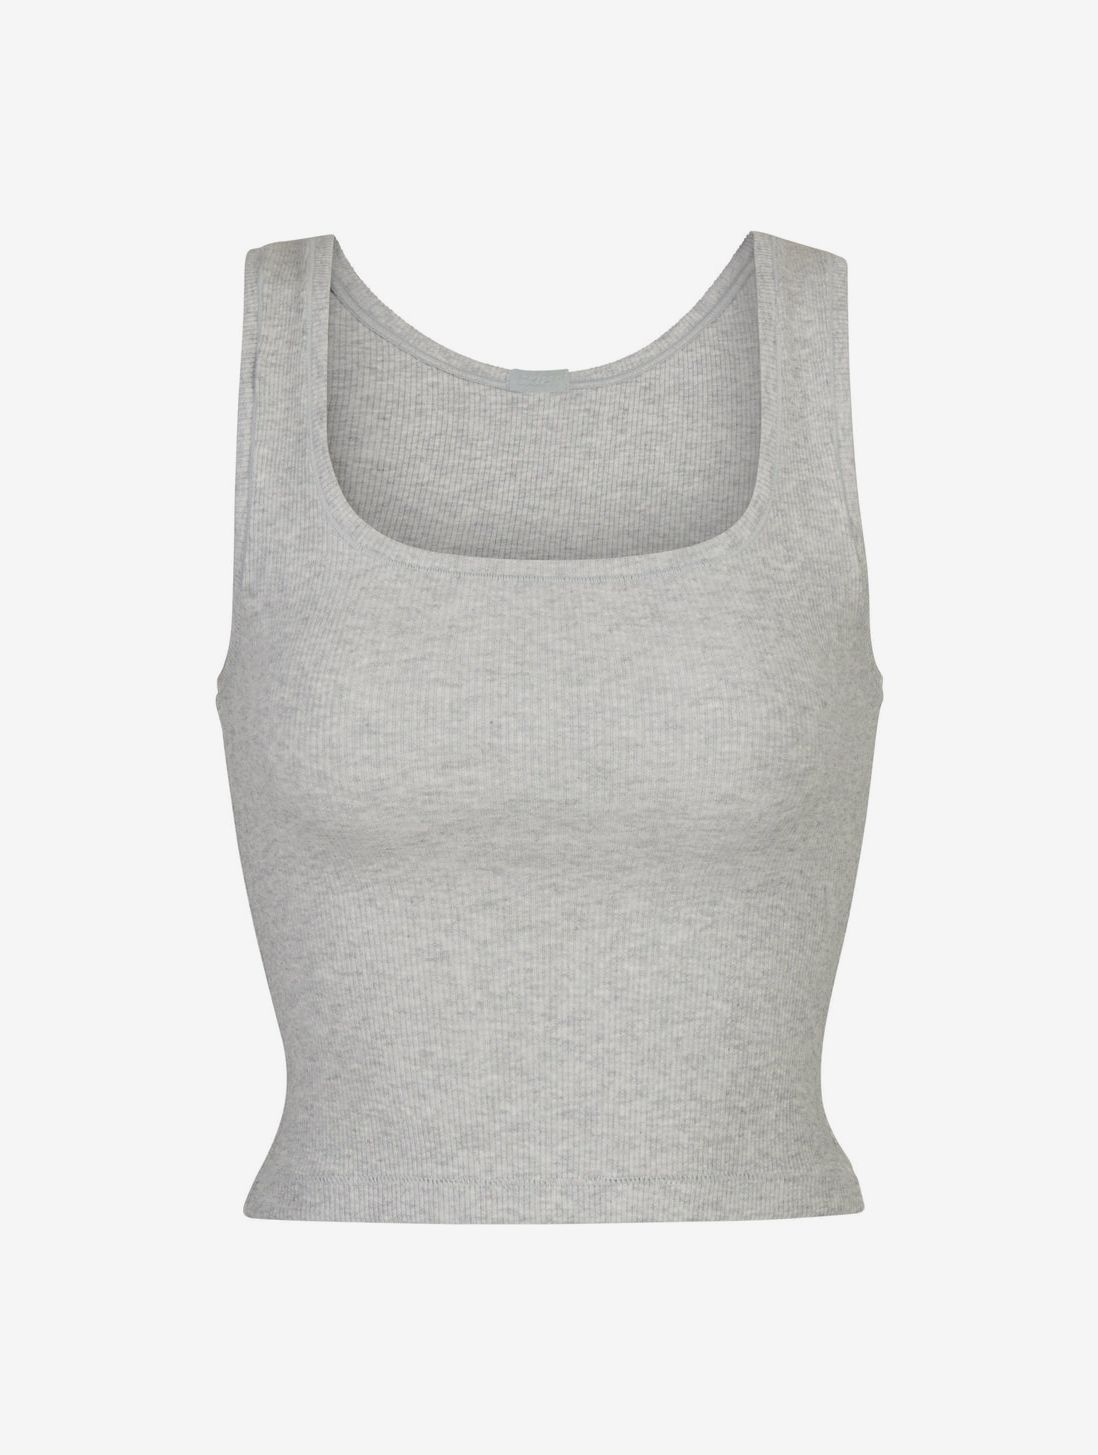 13 Best Cotton Tank Tops For Women That Are Actually Cotton (2023